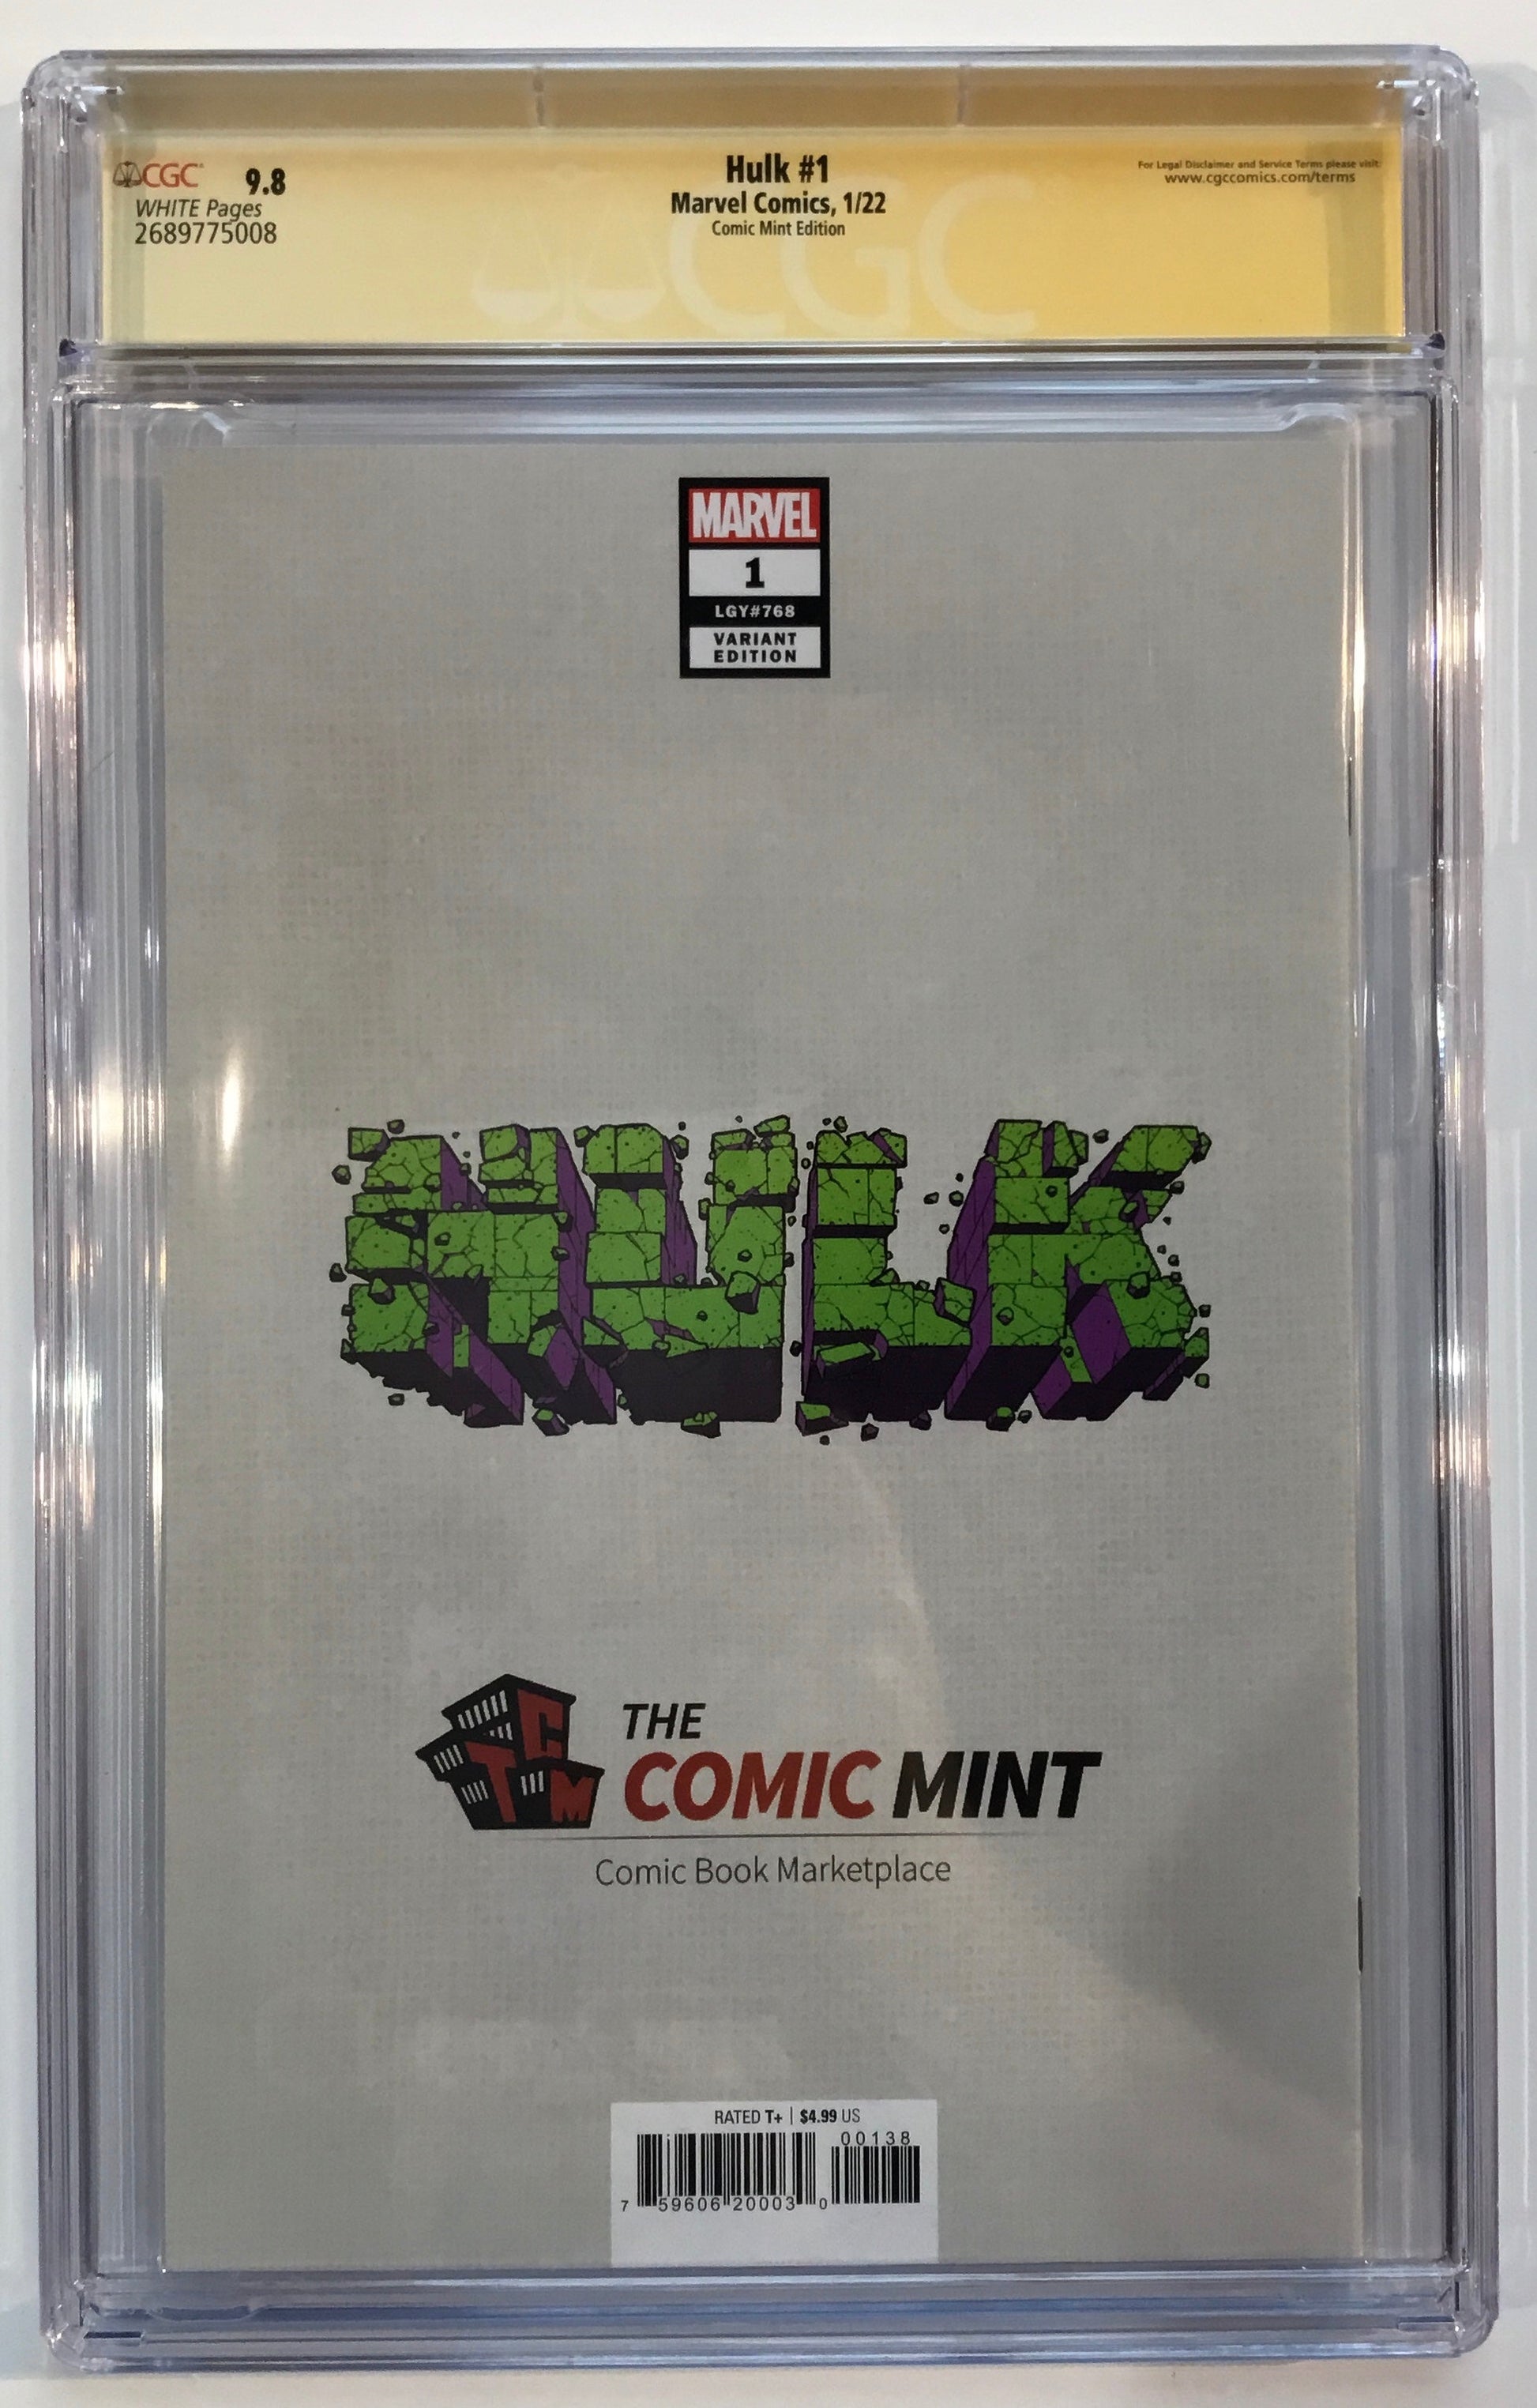 HULK #1 - COMIC MINT VARIANT - CGC 9.8 SIGNED BY CATES, STEGMAN, & OTTLEY